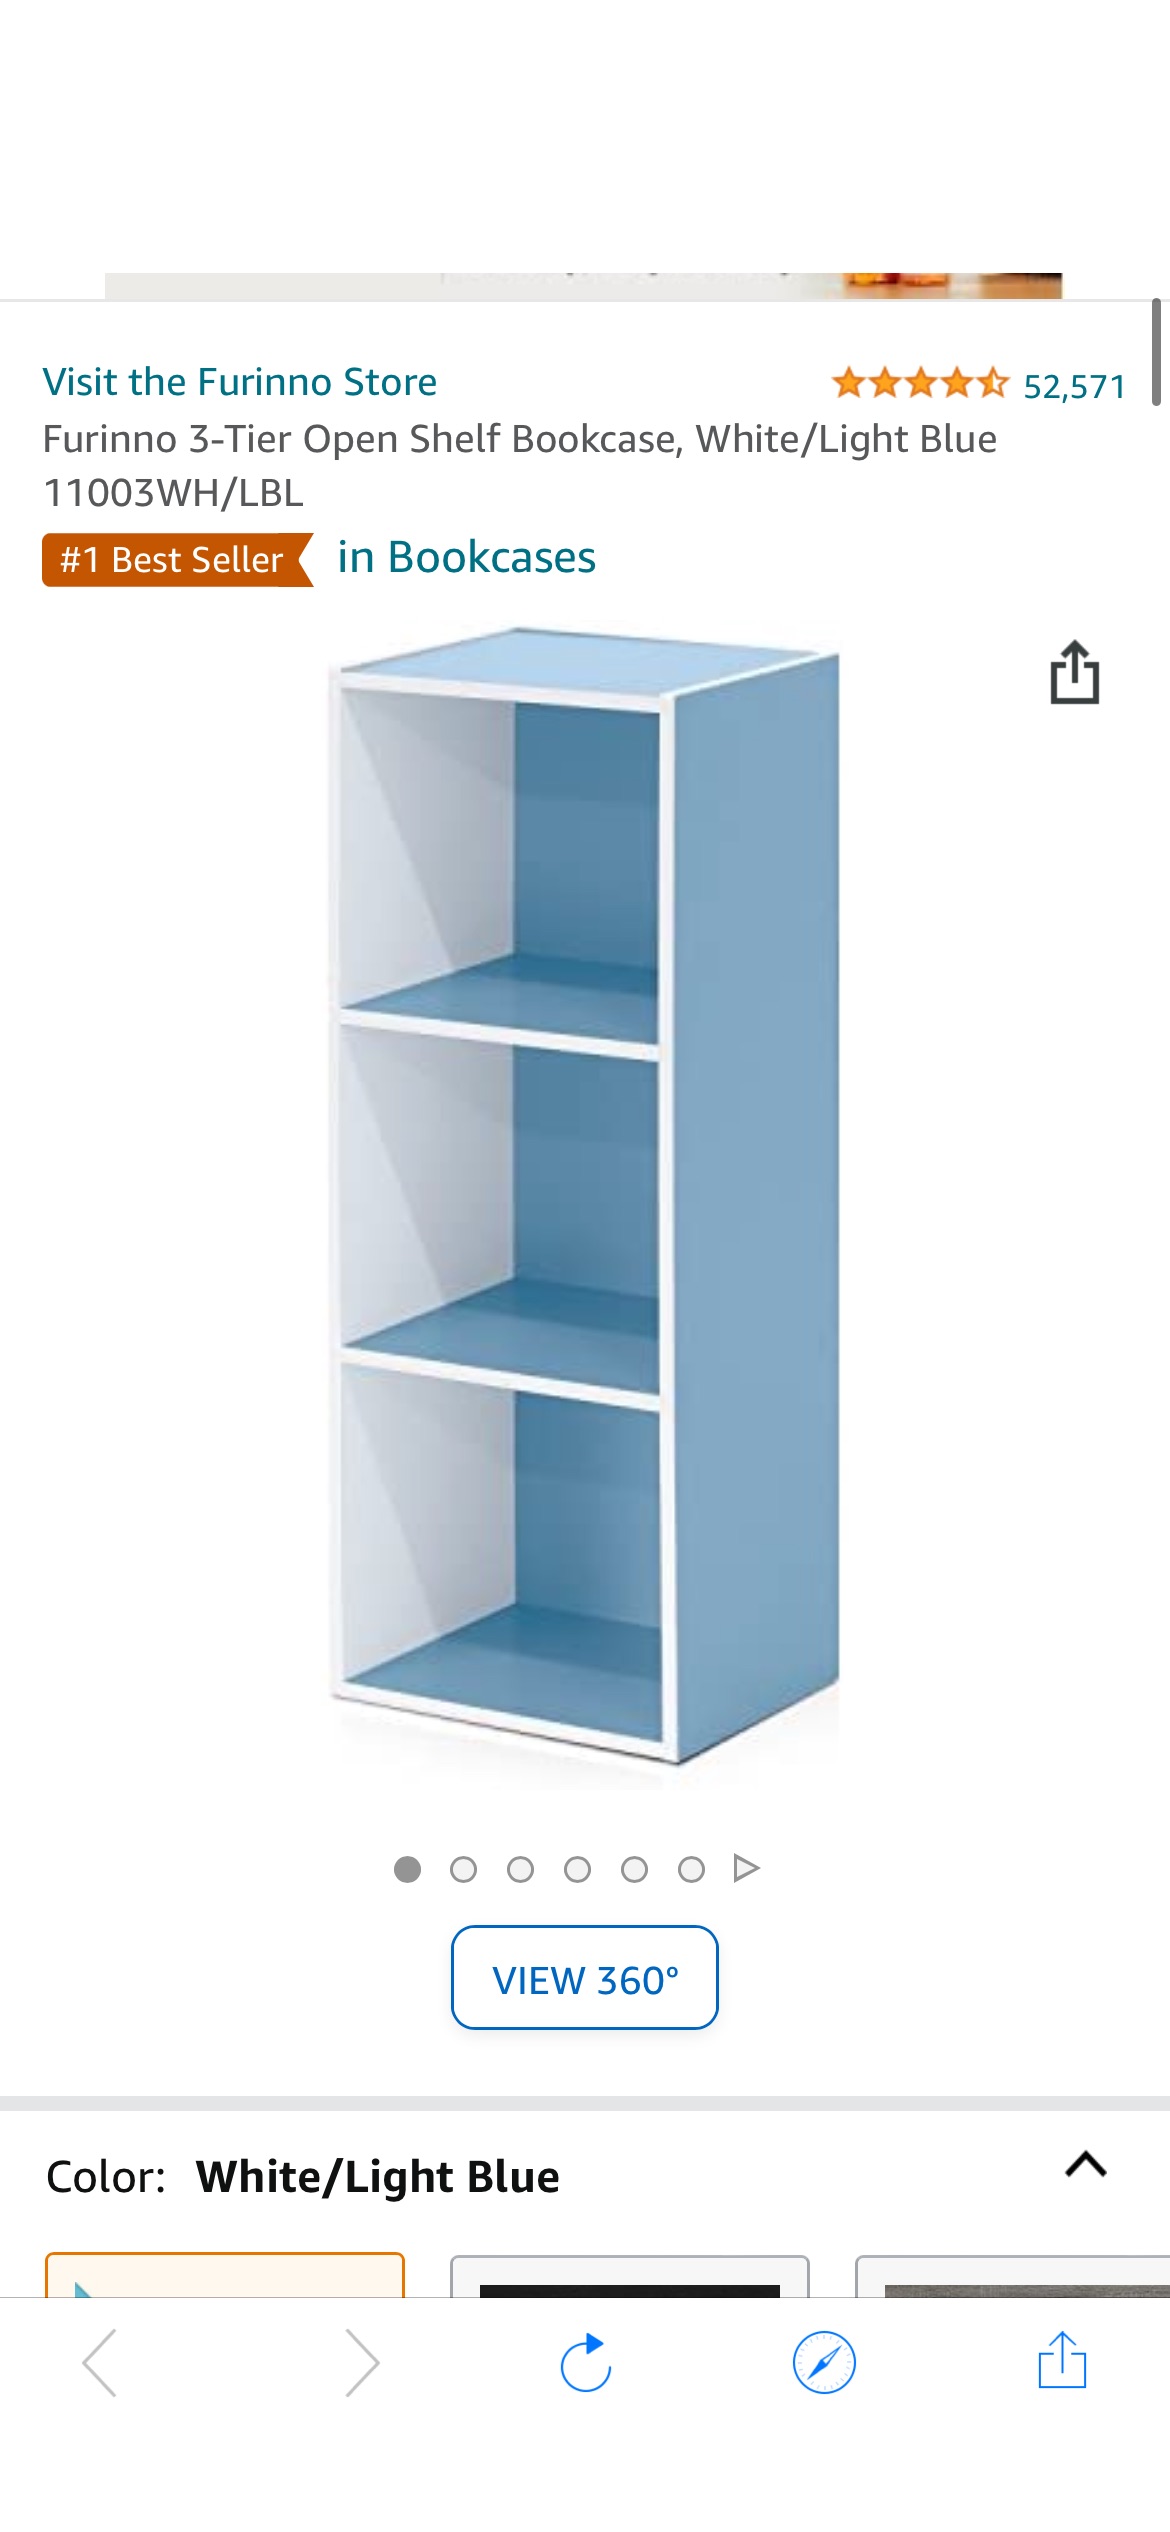 Amazon.com: Furinno 3-Tier Open Shelf Bookcase, White/Light Blue 11003WH/LBL : Everything Else 书柜